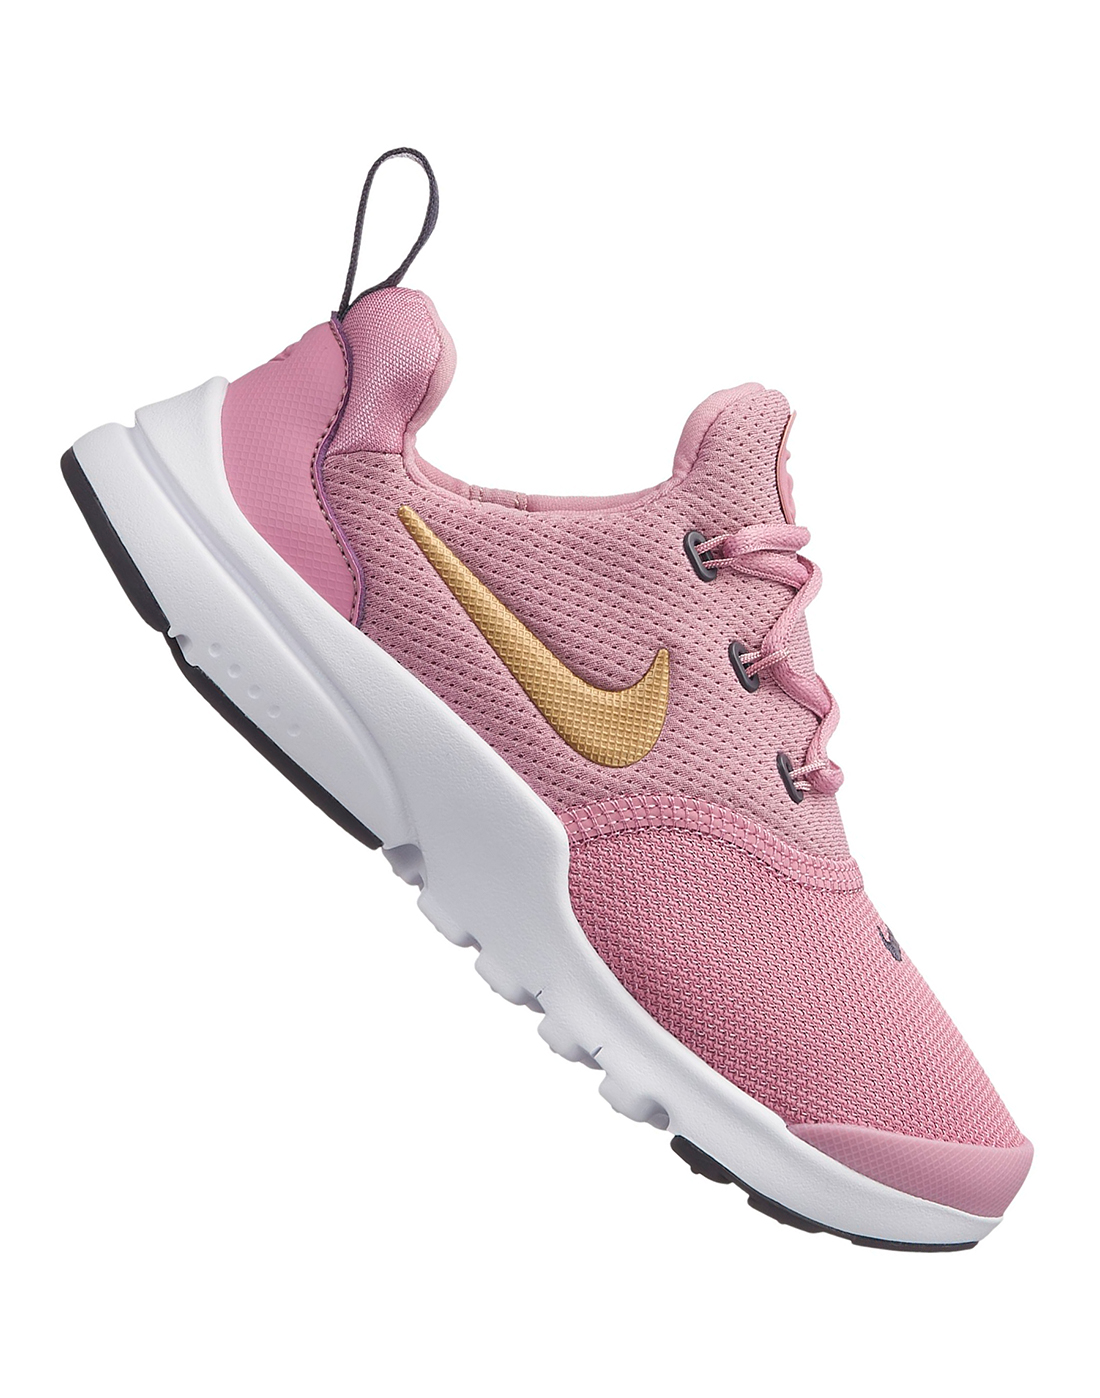 Girls Nike Presto Fly Trainers | Pink 